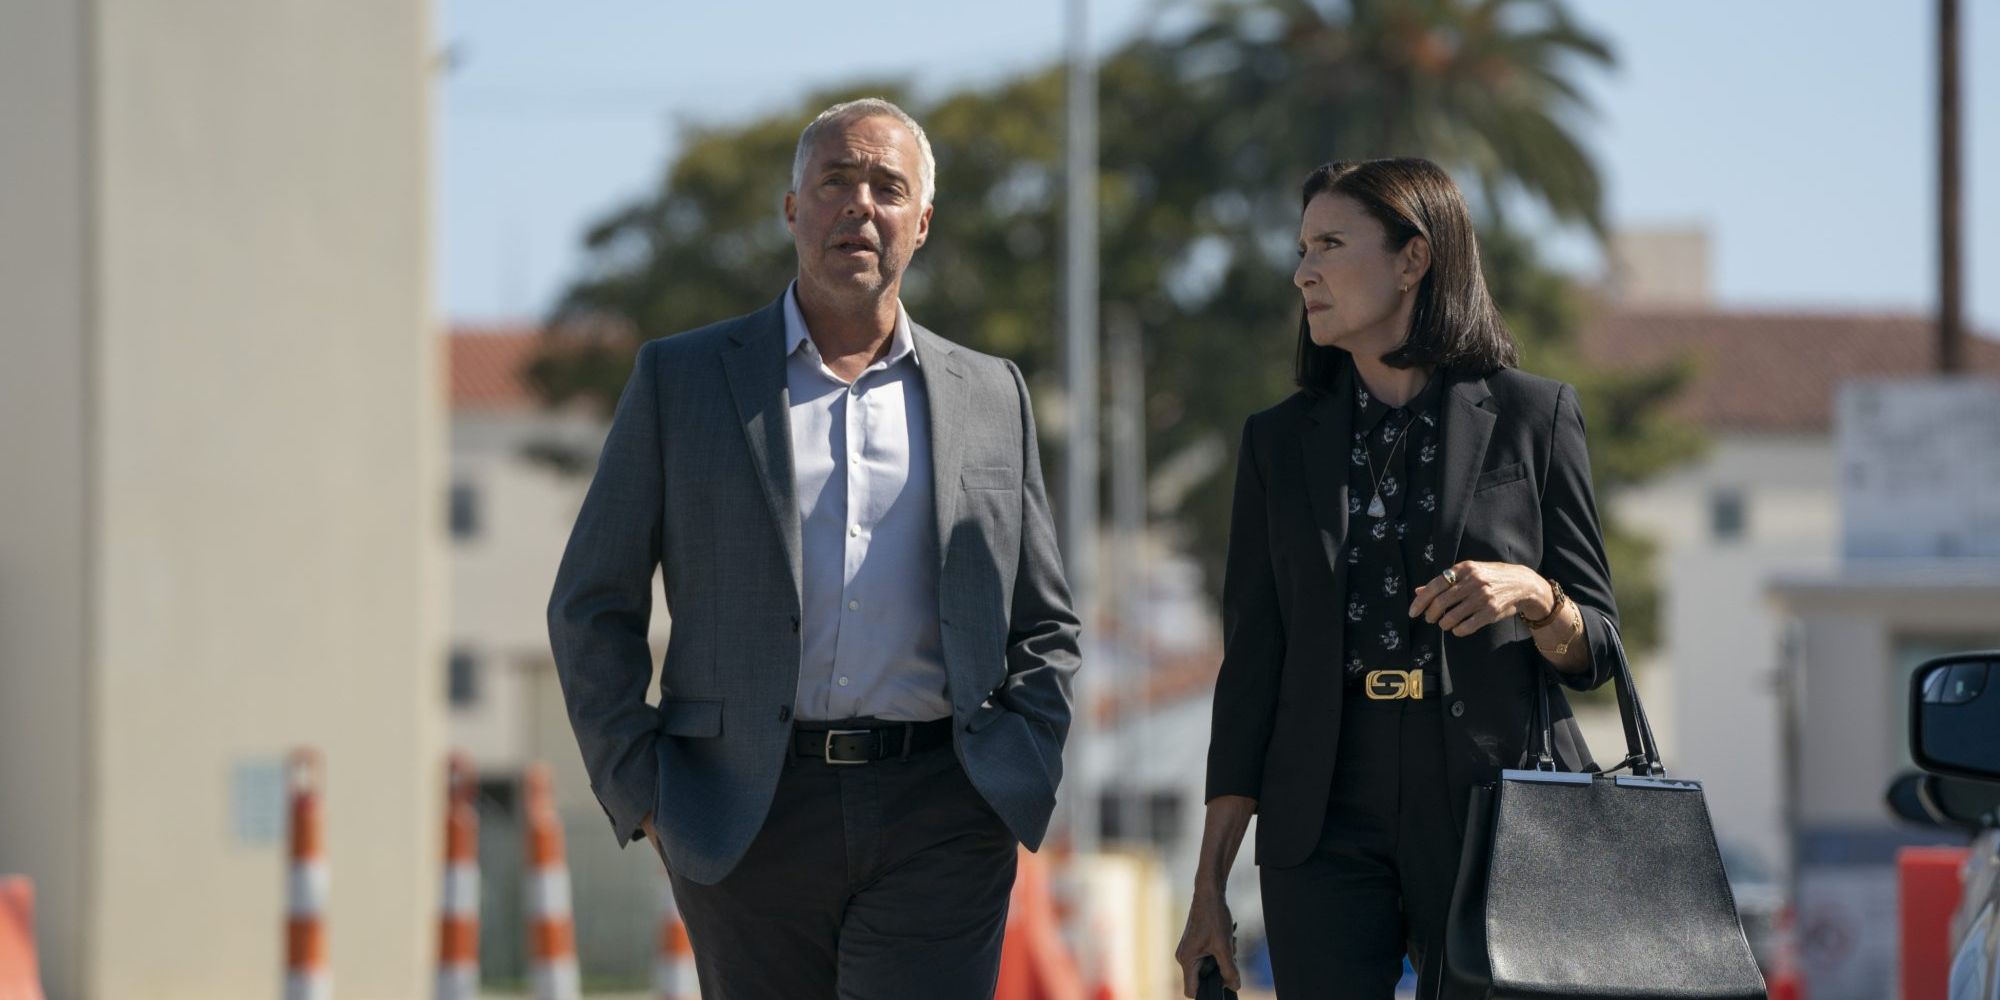 Harry bosch and honey chandler dressed smartly